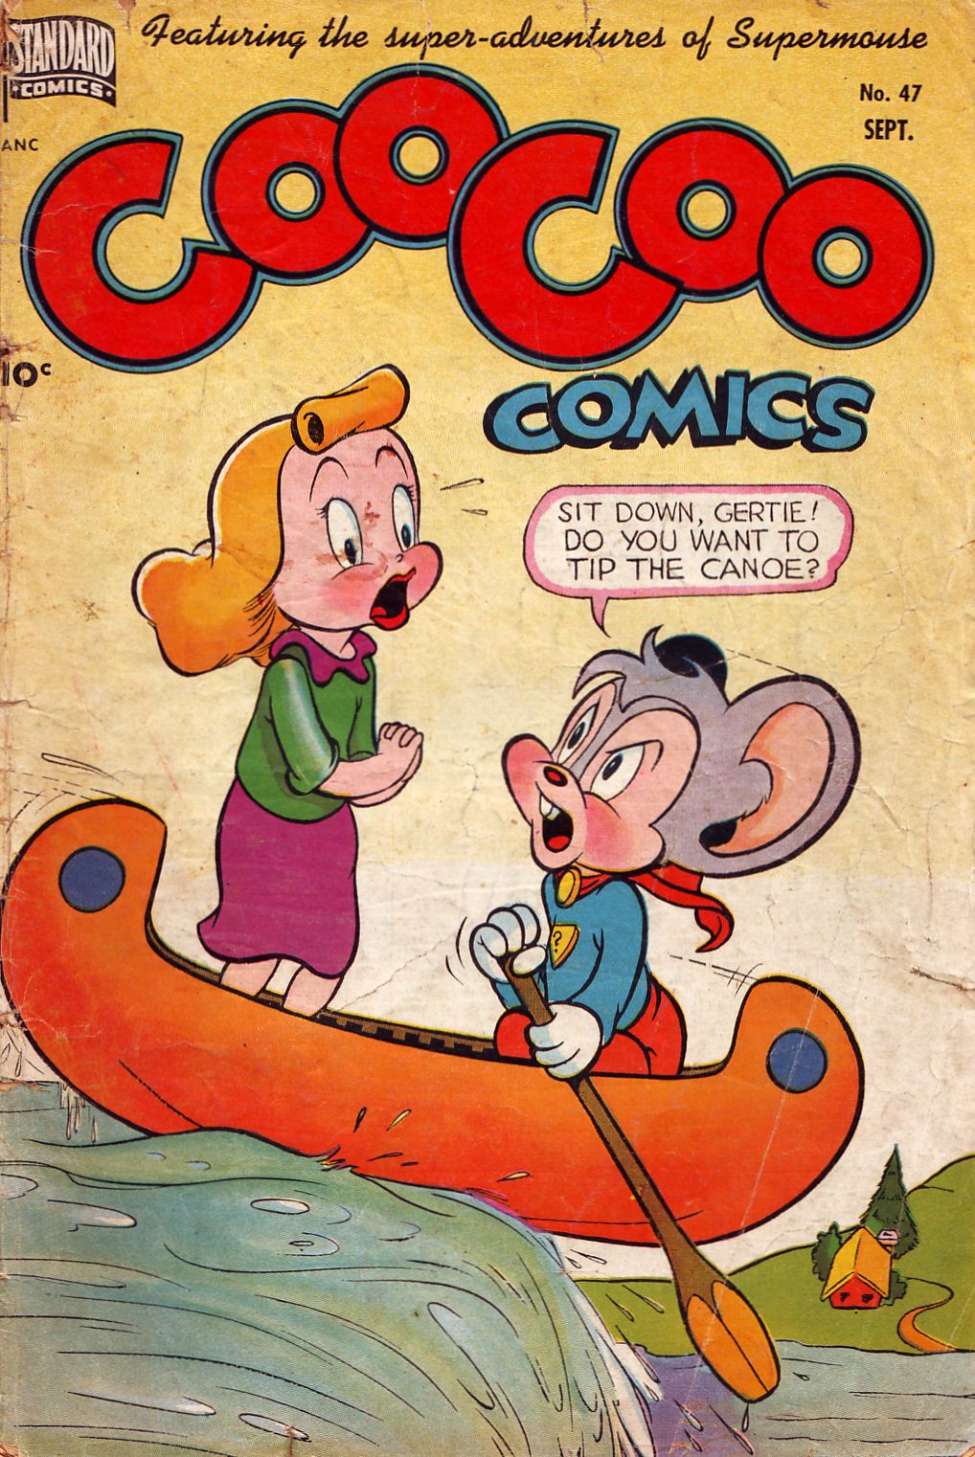 Book Cover For Coo Coo Comics 47